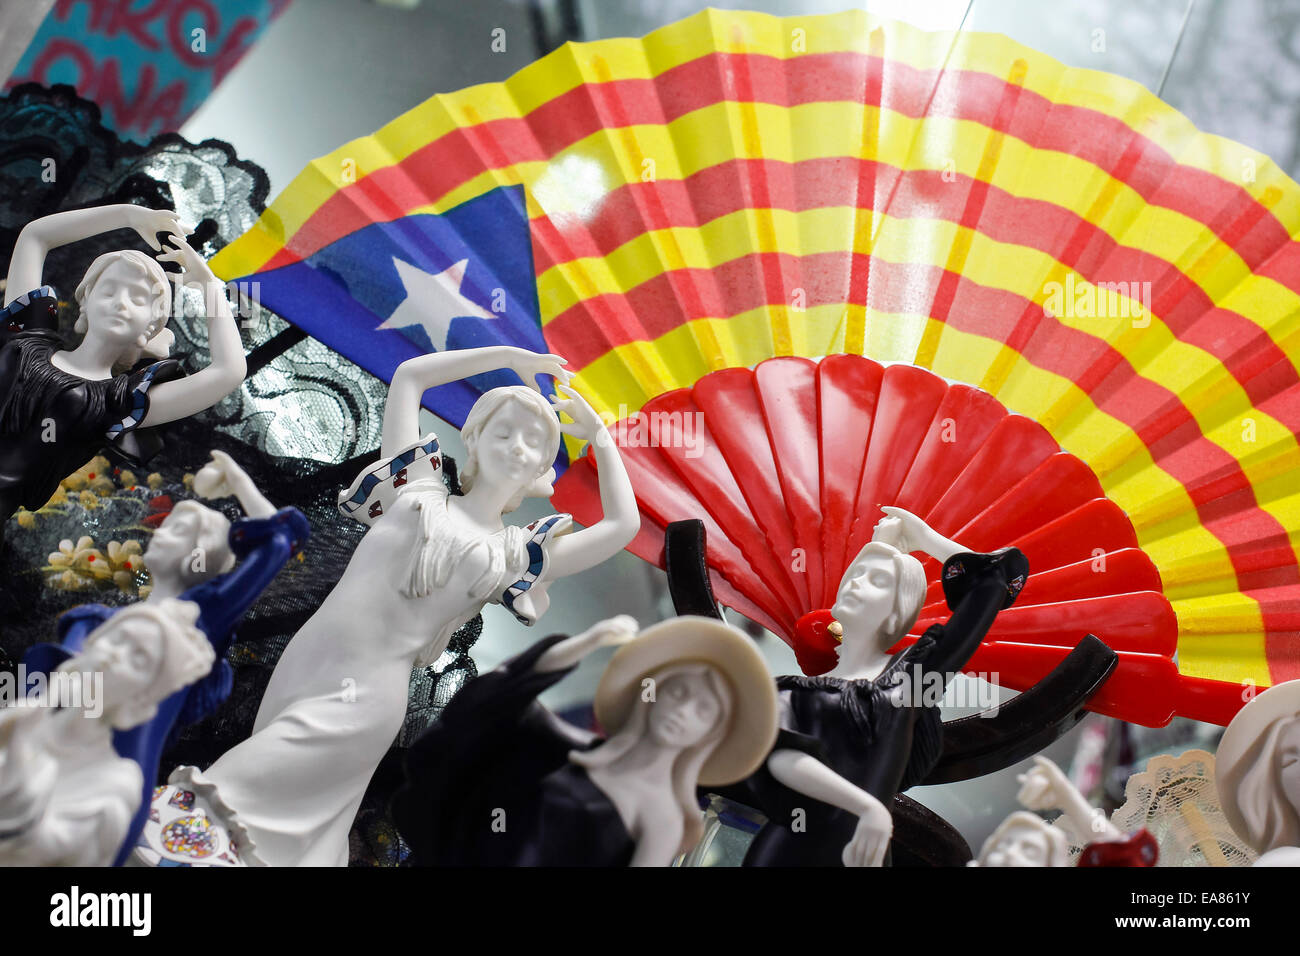 Display window with souvenirs: fan with the Catalan independence flag and typical Spanish dancers Stock Photo